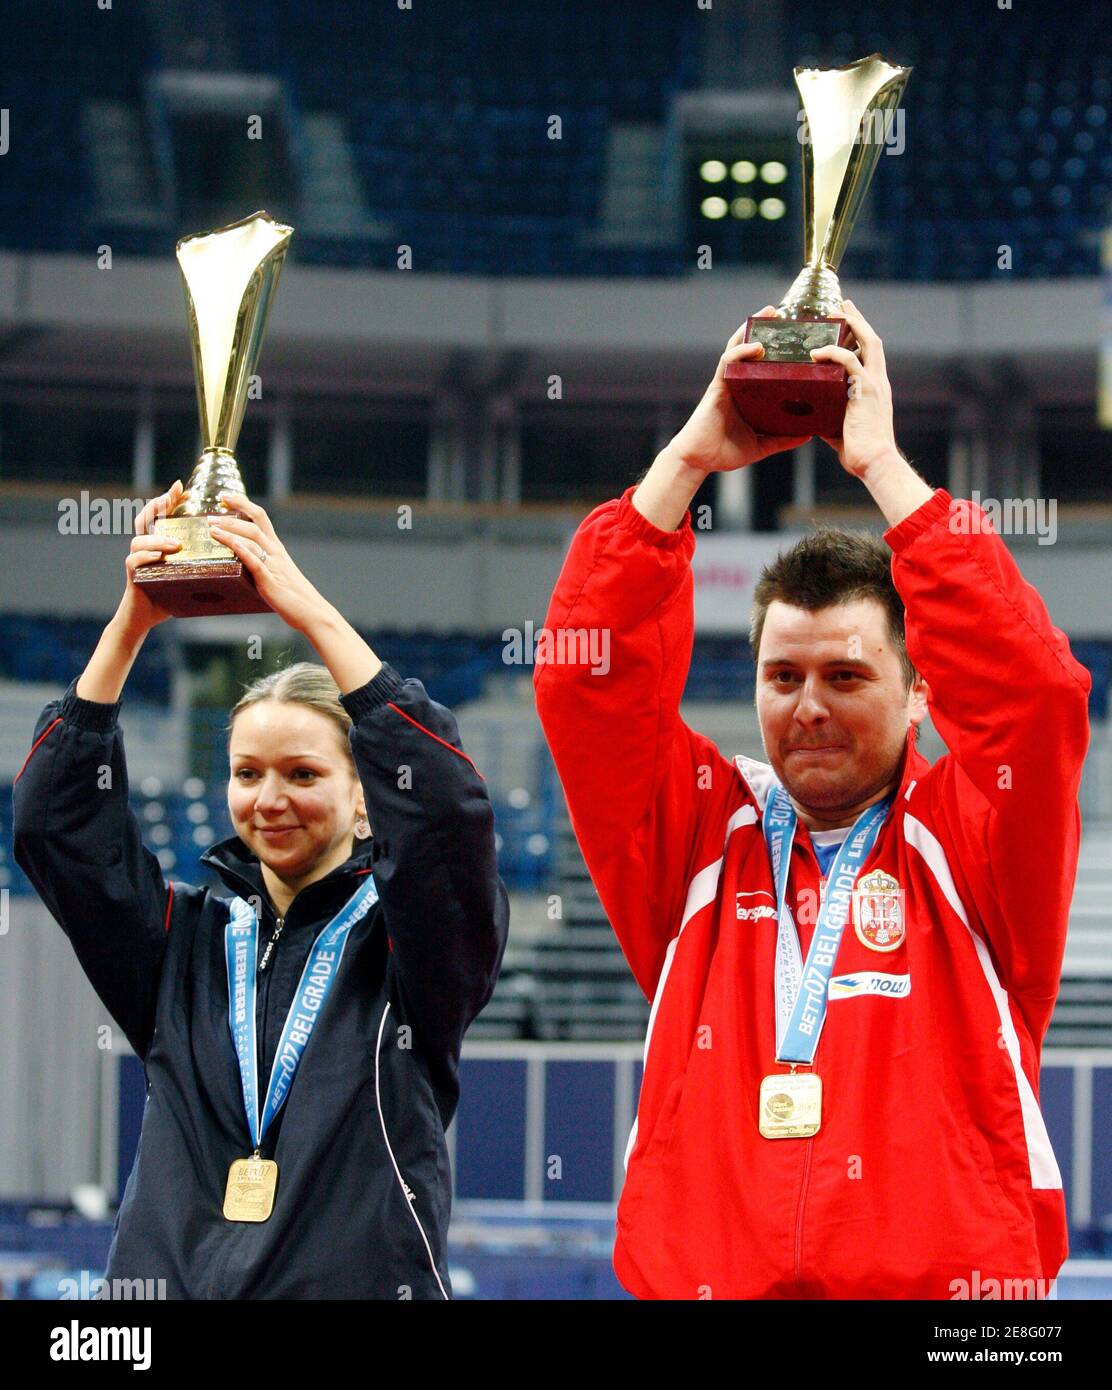 Lithuania's Ruta Paskauskiene (L) and Serbia's Aleksandar Karakasevic raise their trophies after winning the mixed doubles final match at the European Table Tennis Championships in Belgrade, March 30, 2007.  REUTERS/Ivan Milutinovic   (SERBIA) Stock Photo